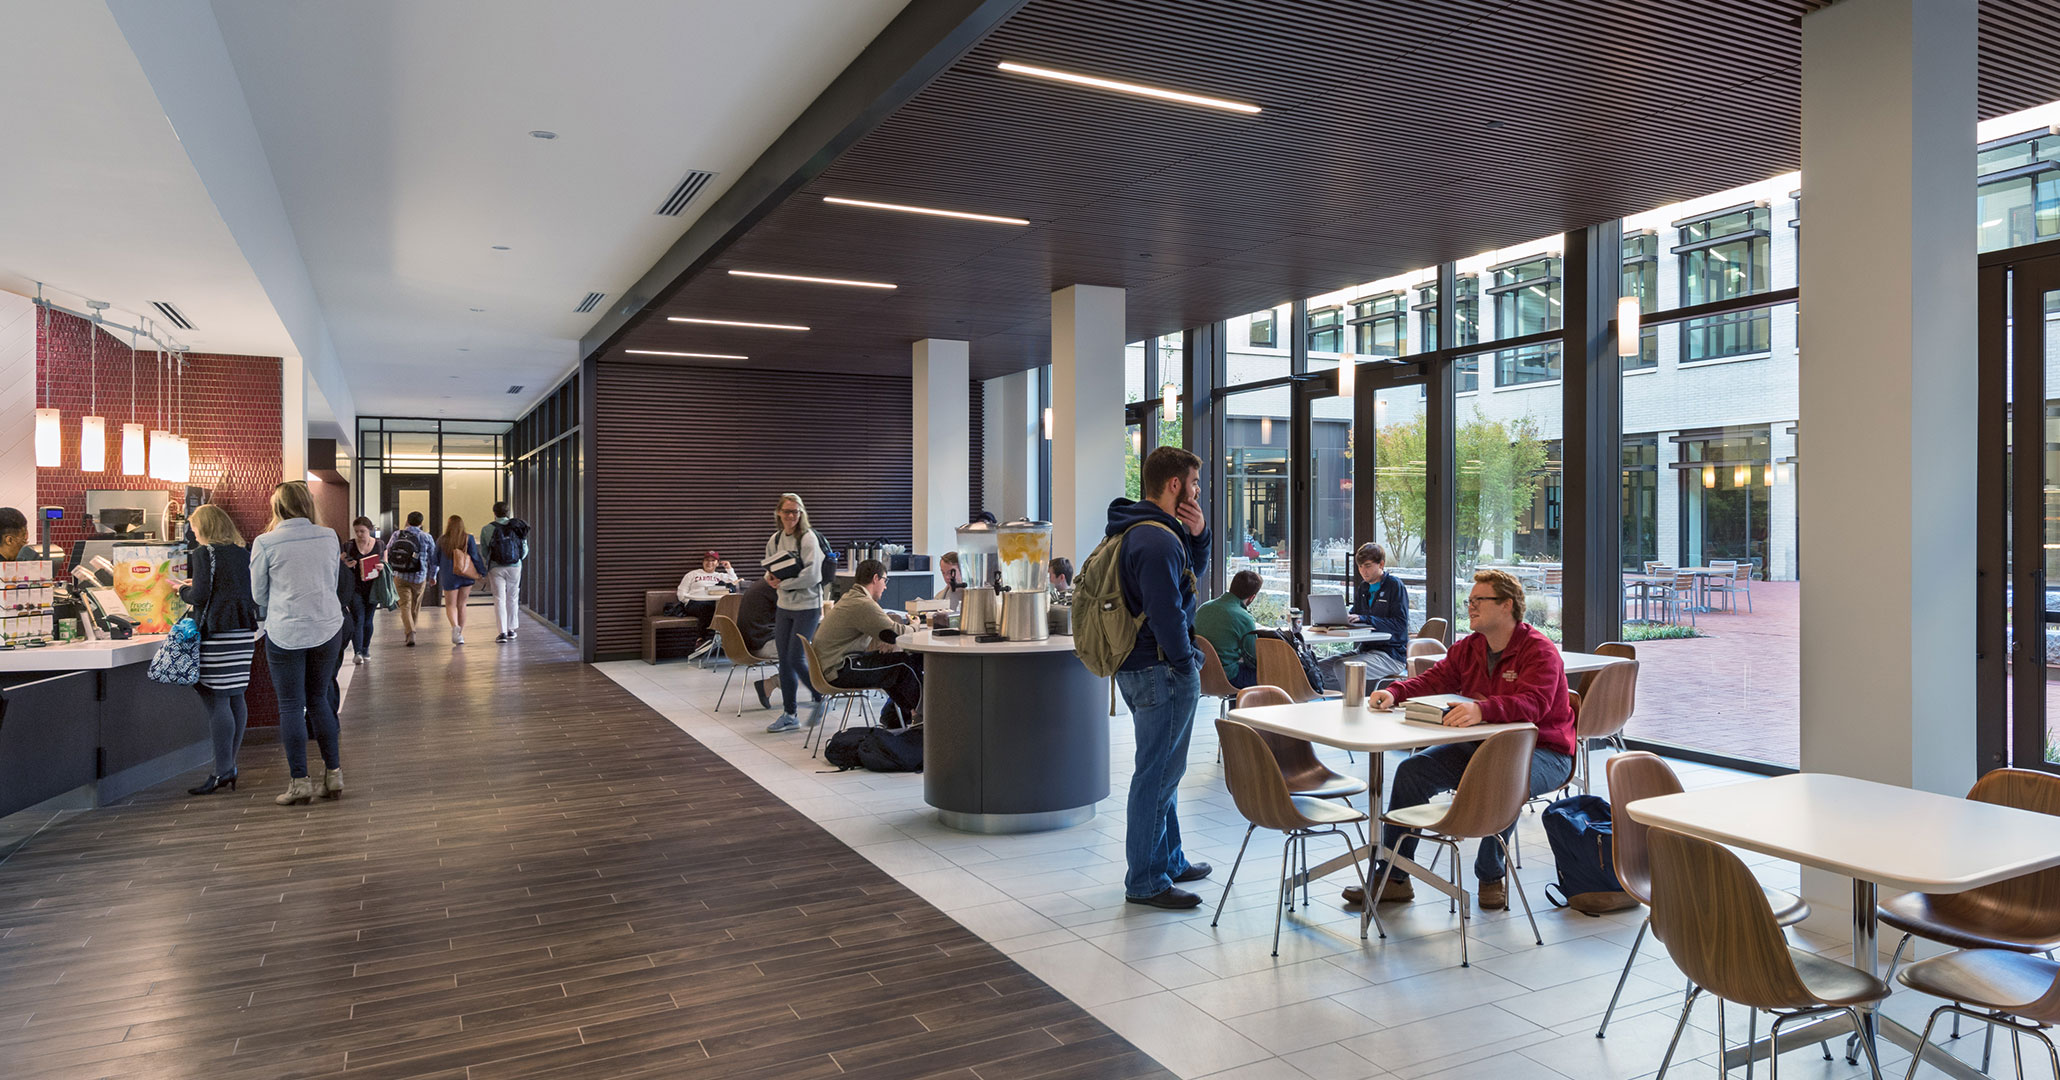 The University of South Carolina worked with Boudreaux architects to design the café space at the new Law School.